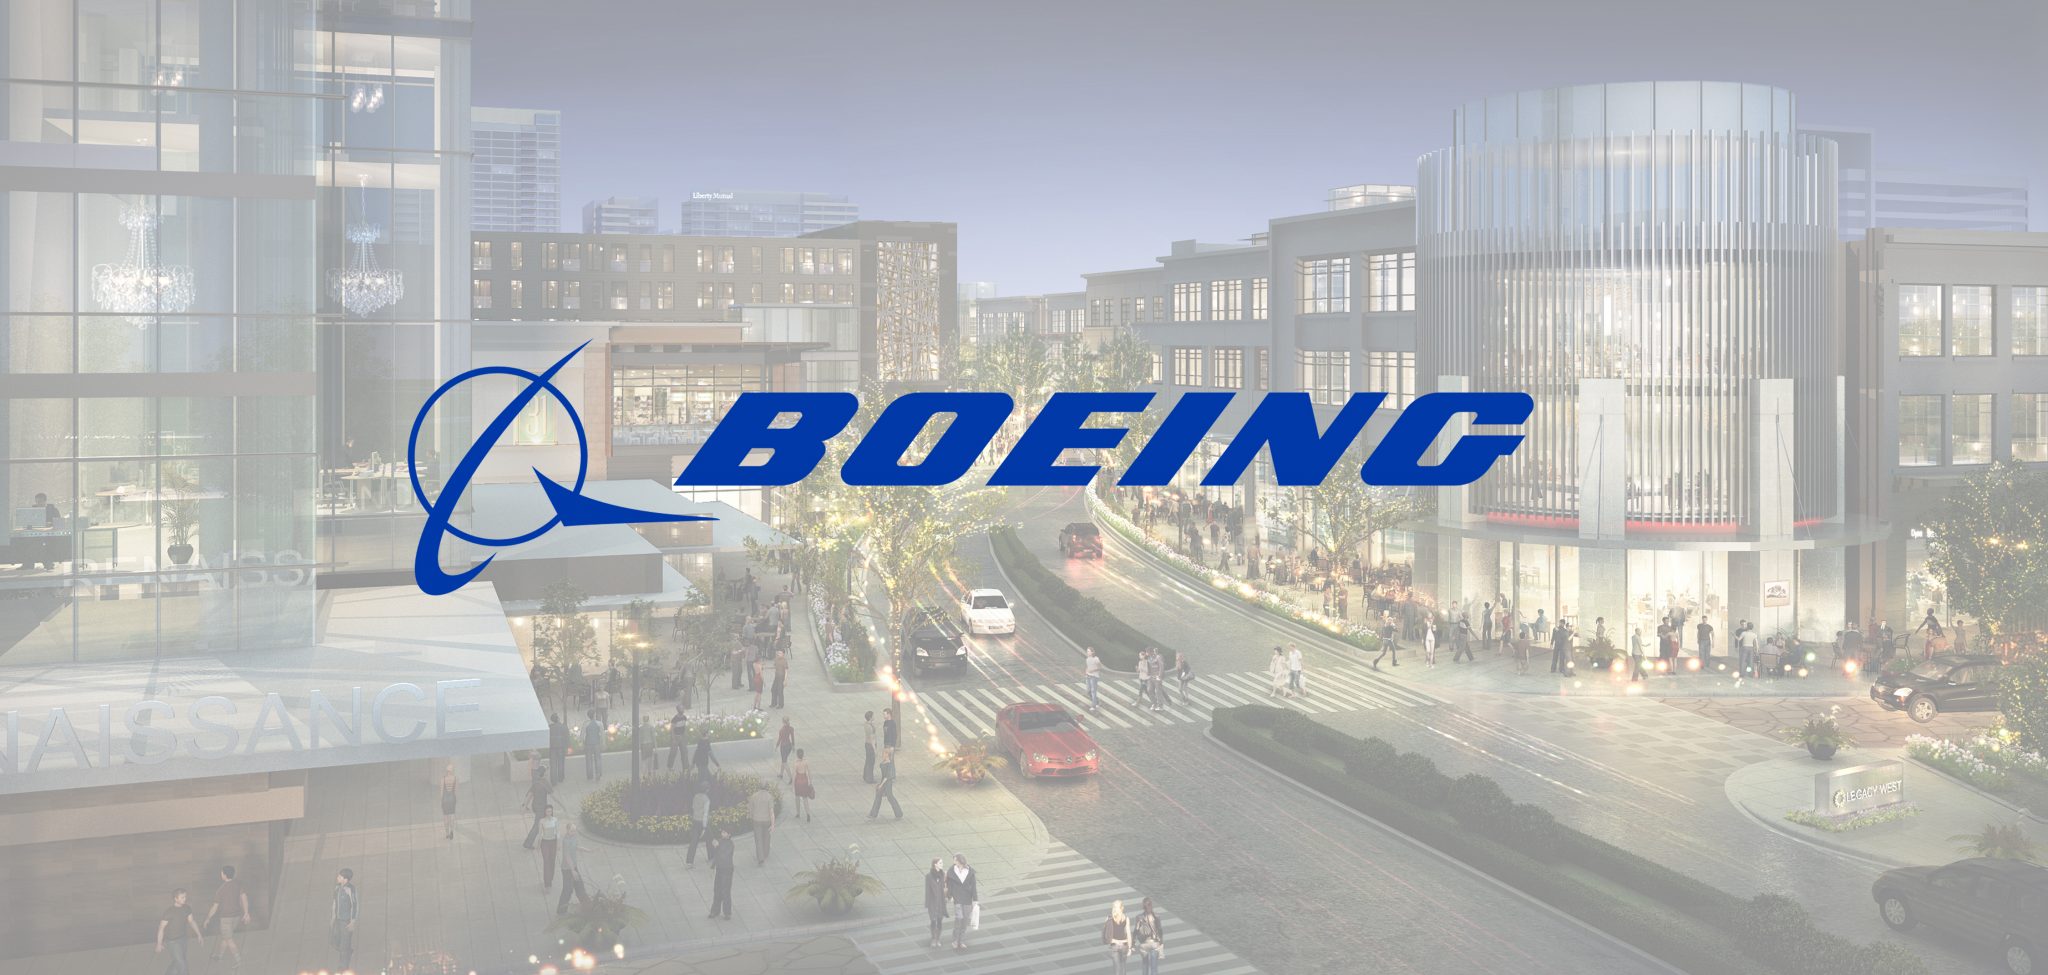 Boeing division makes $2 billion in ecommerce sales